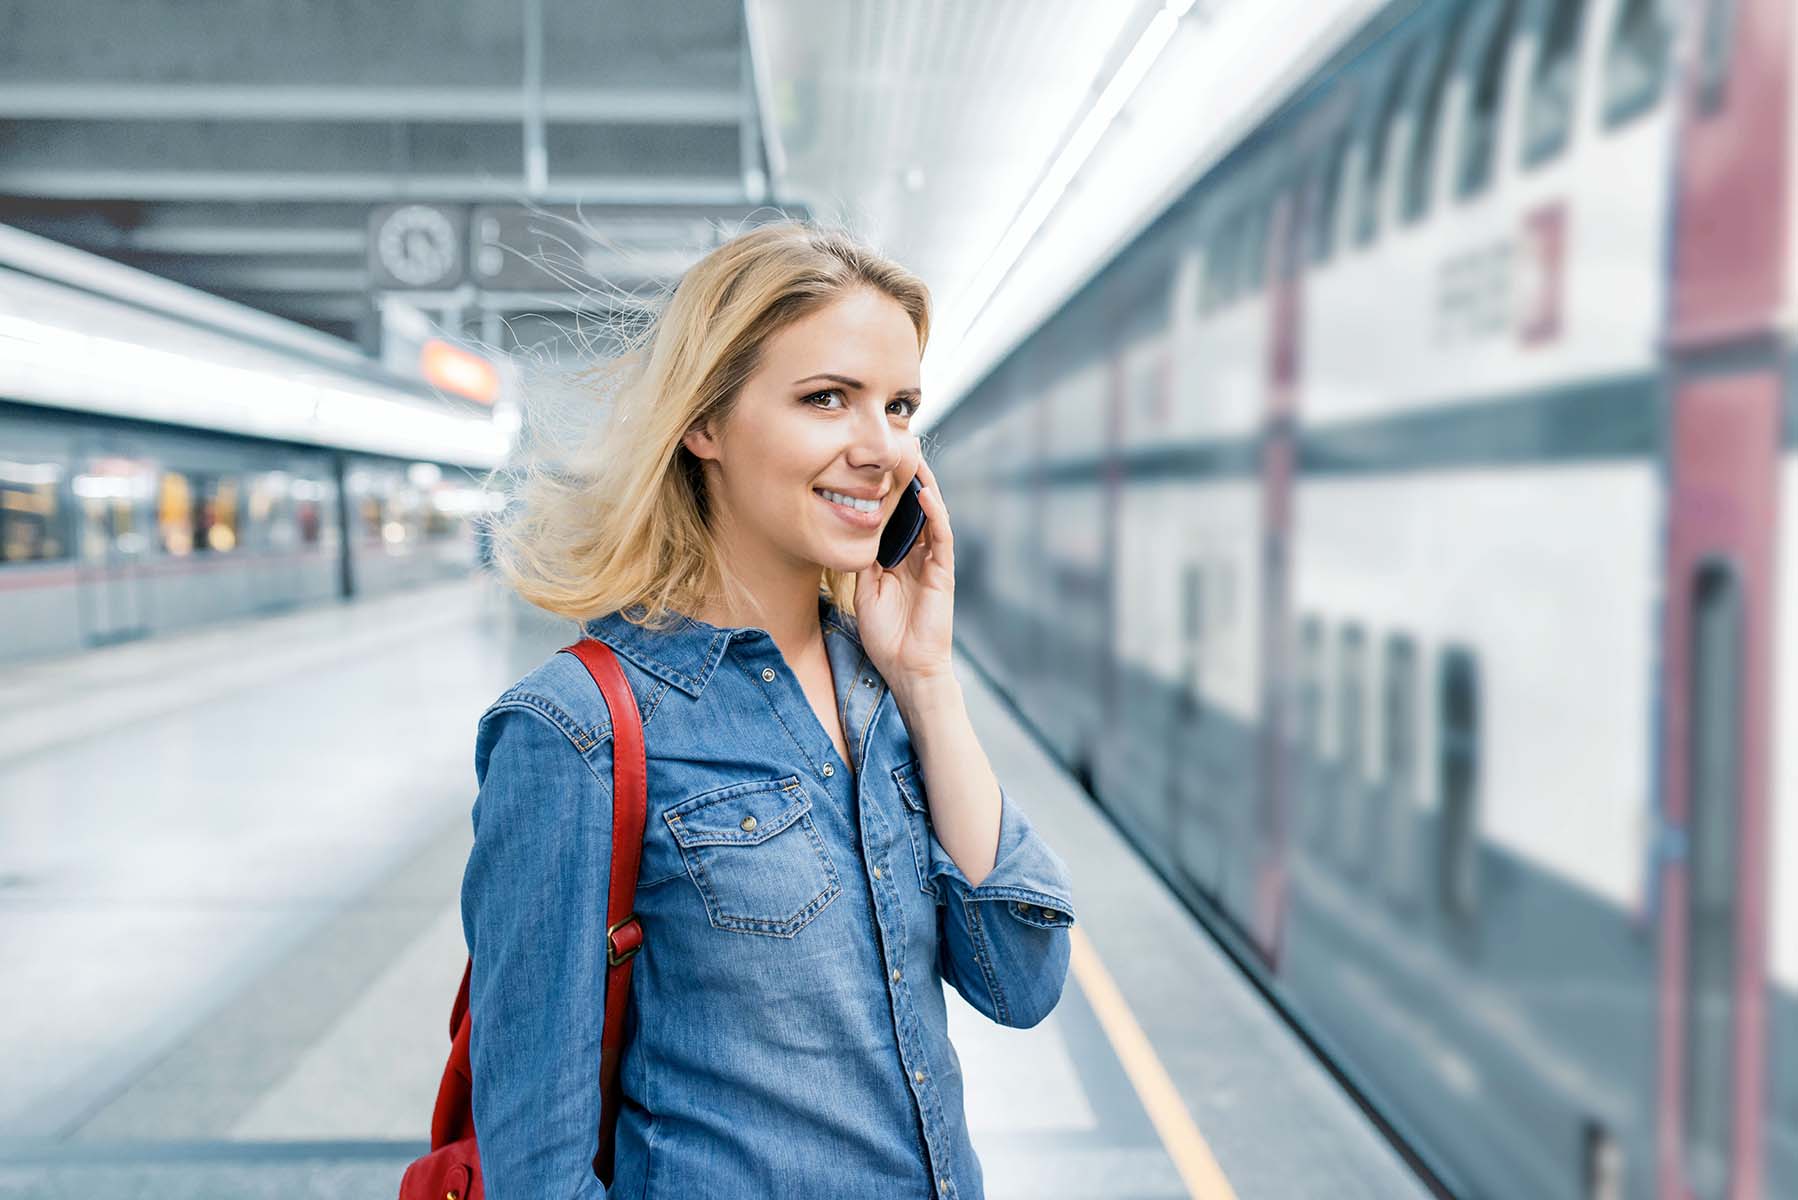 Woman talking on her mobile phone on the platform